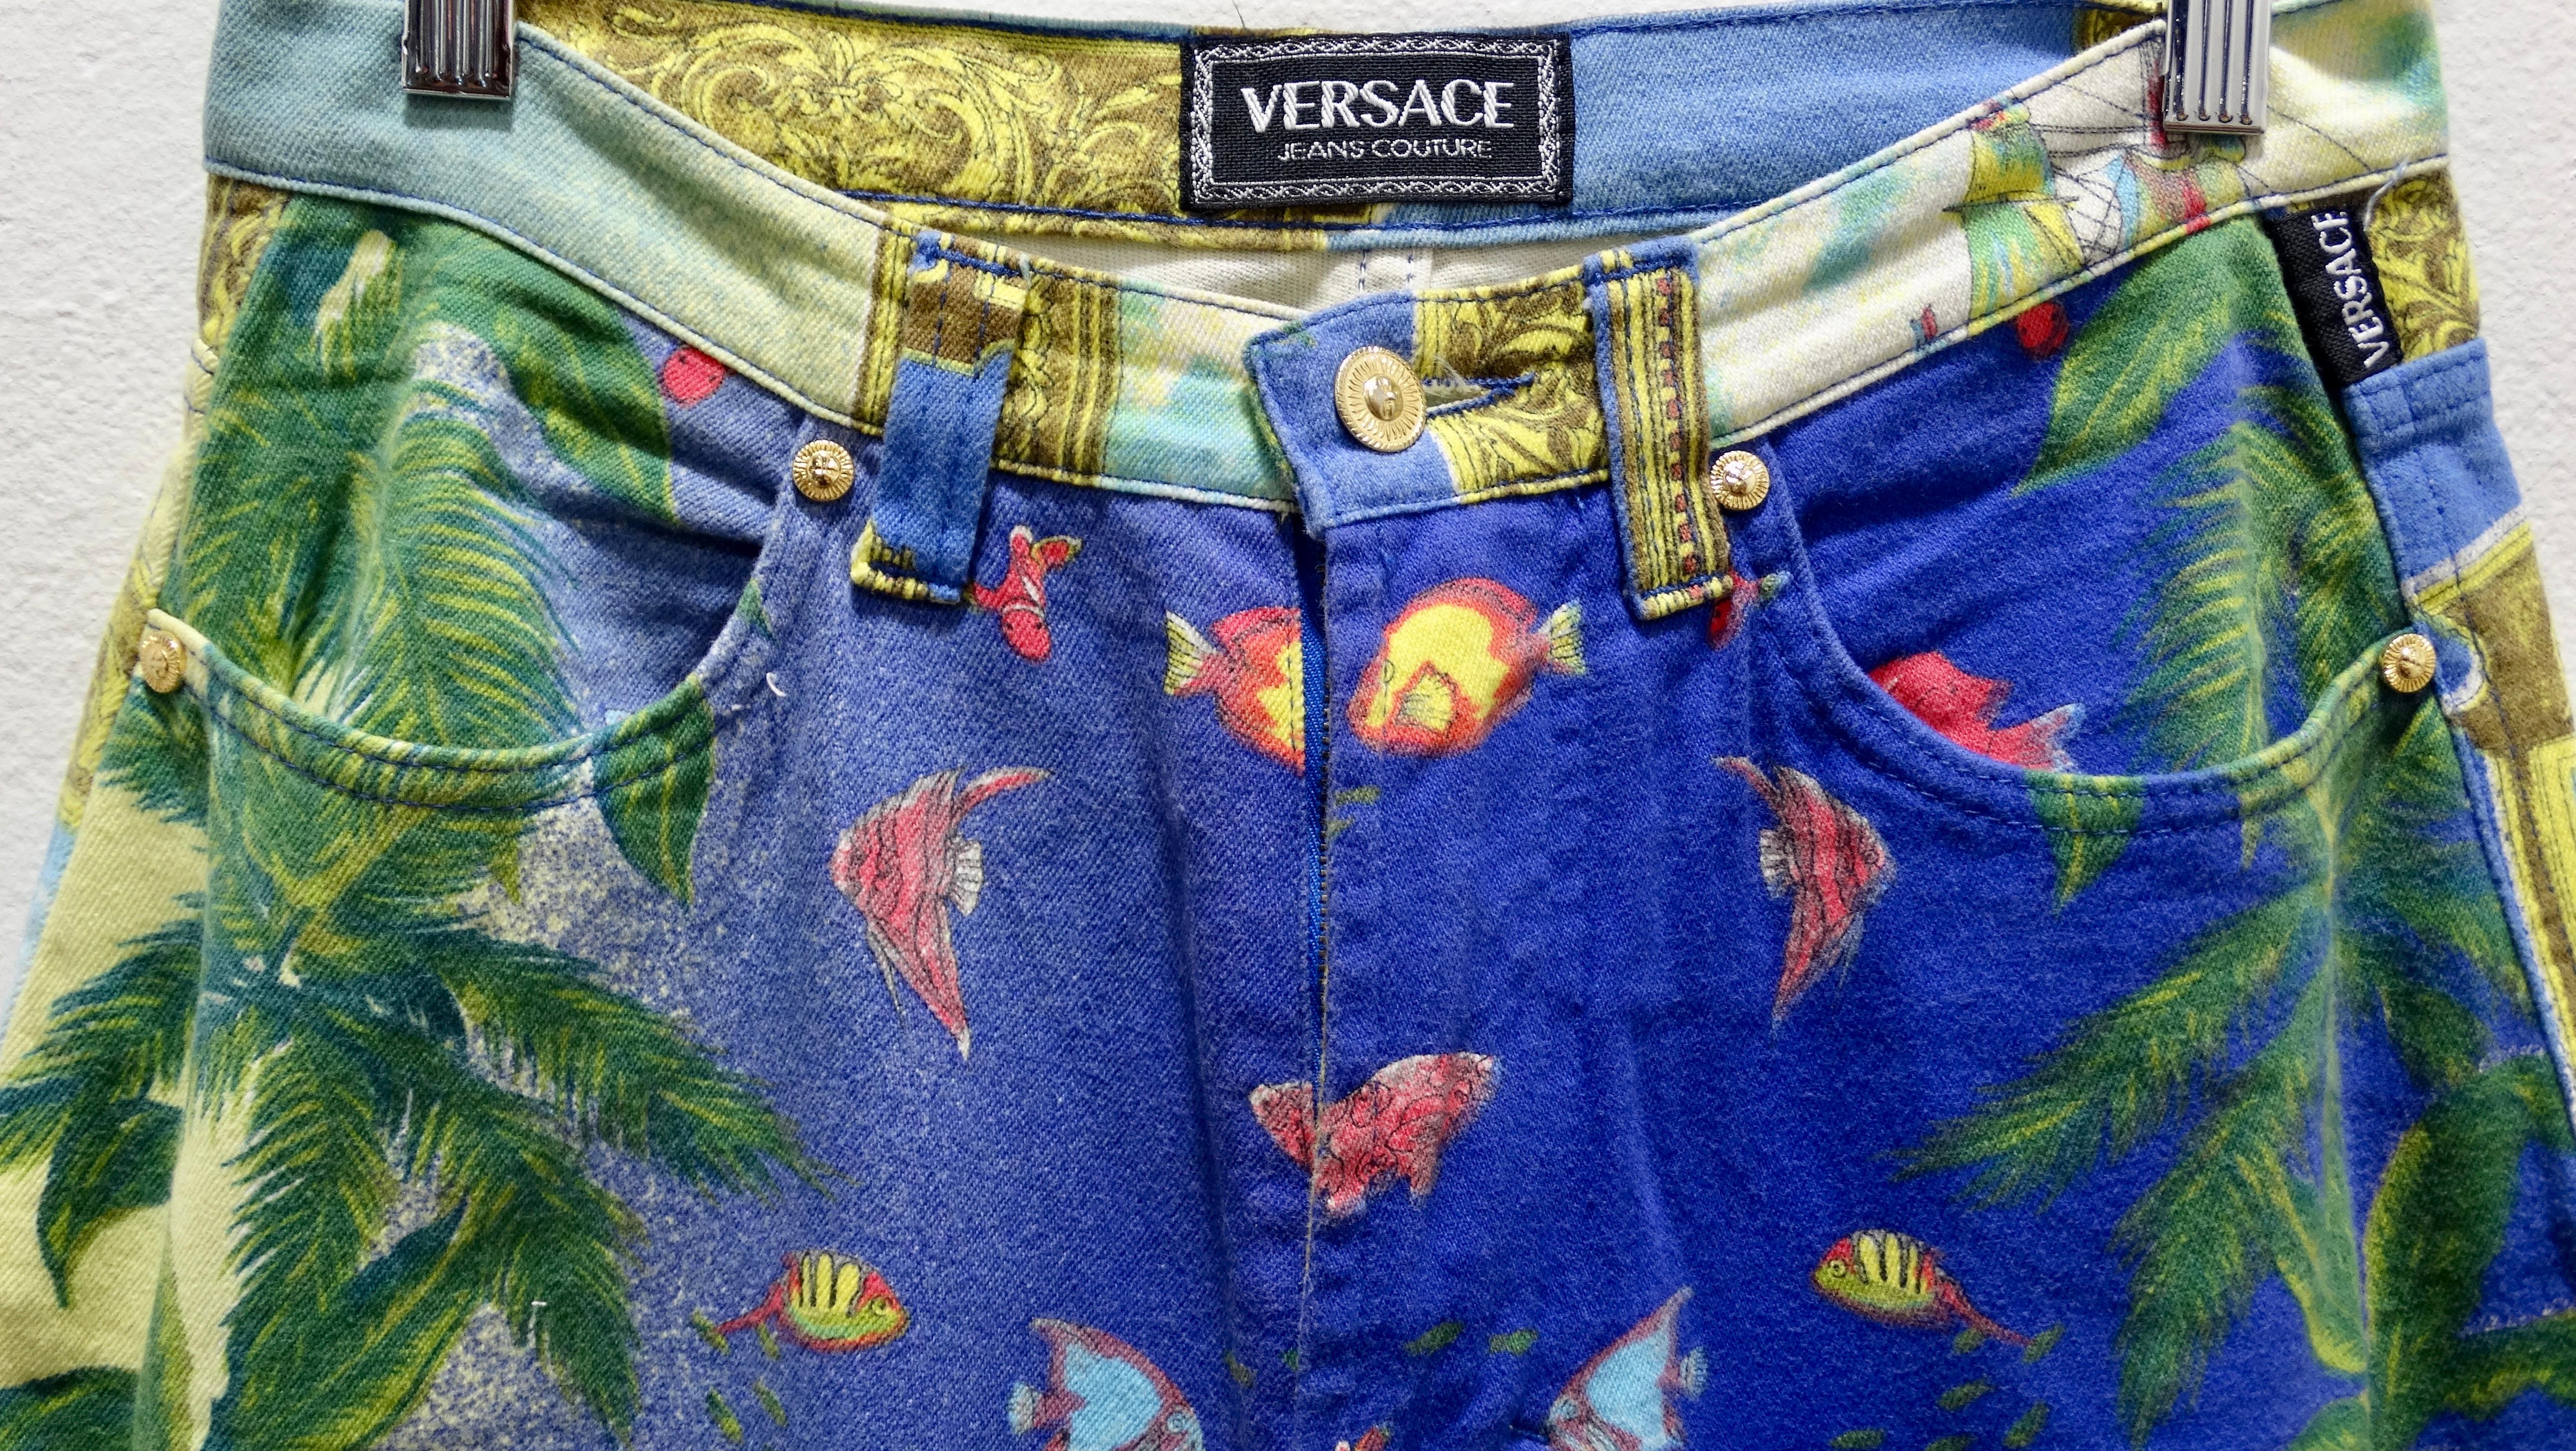 Gianni Versace Ocean Print Jeans In Good Condition For Sale In Scottsdale, AZ